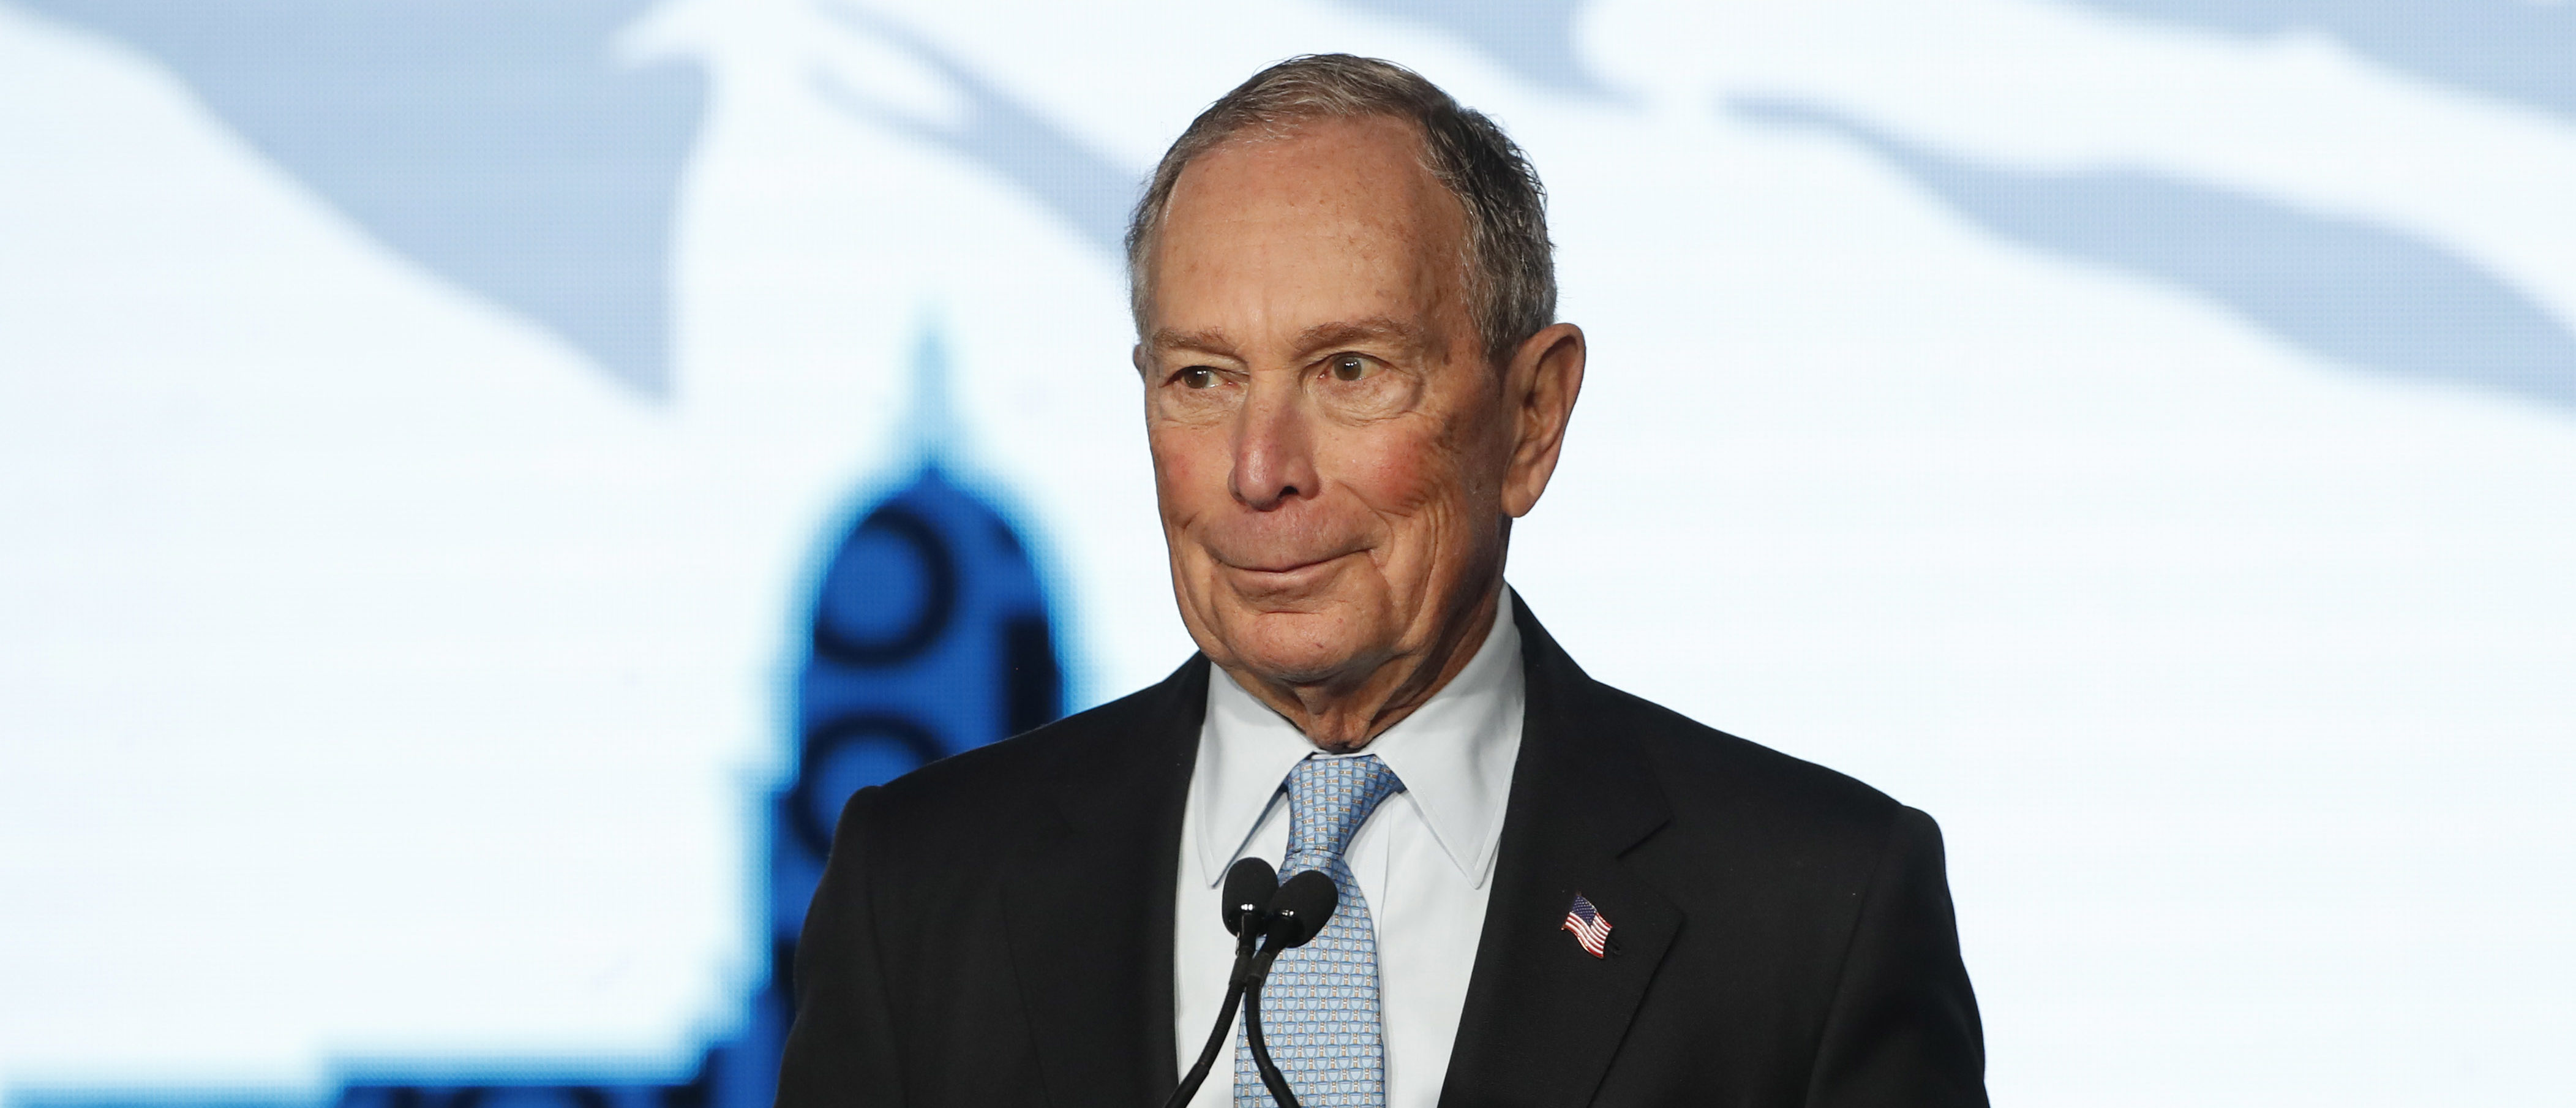 Democratic presidential candidate and former New York City Mayor Mike Bloomberg talks to supporters at a rally on Feb. 20, 2020 in Salt Lake City, Utah. (Photo by George Frey/Getty Images)